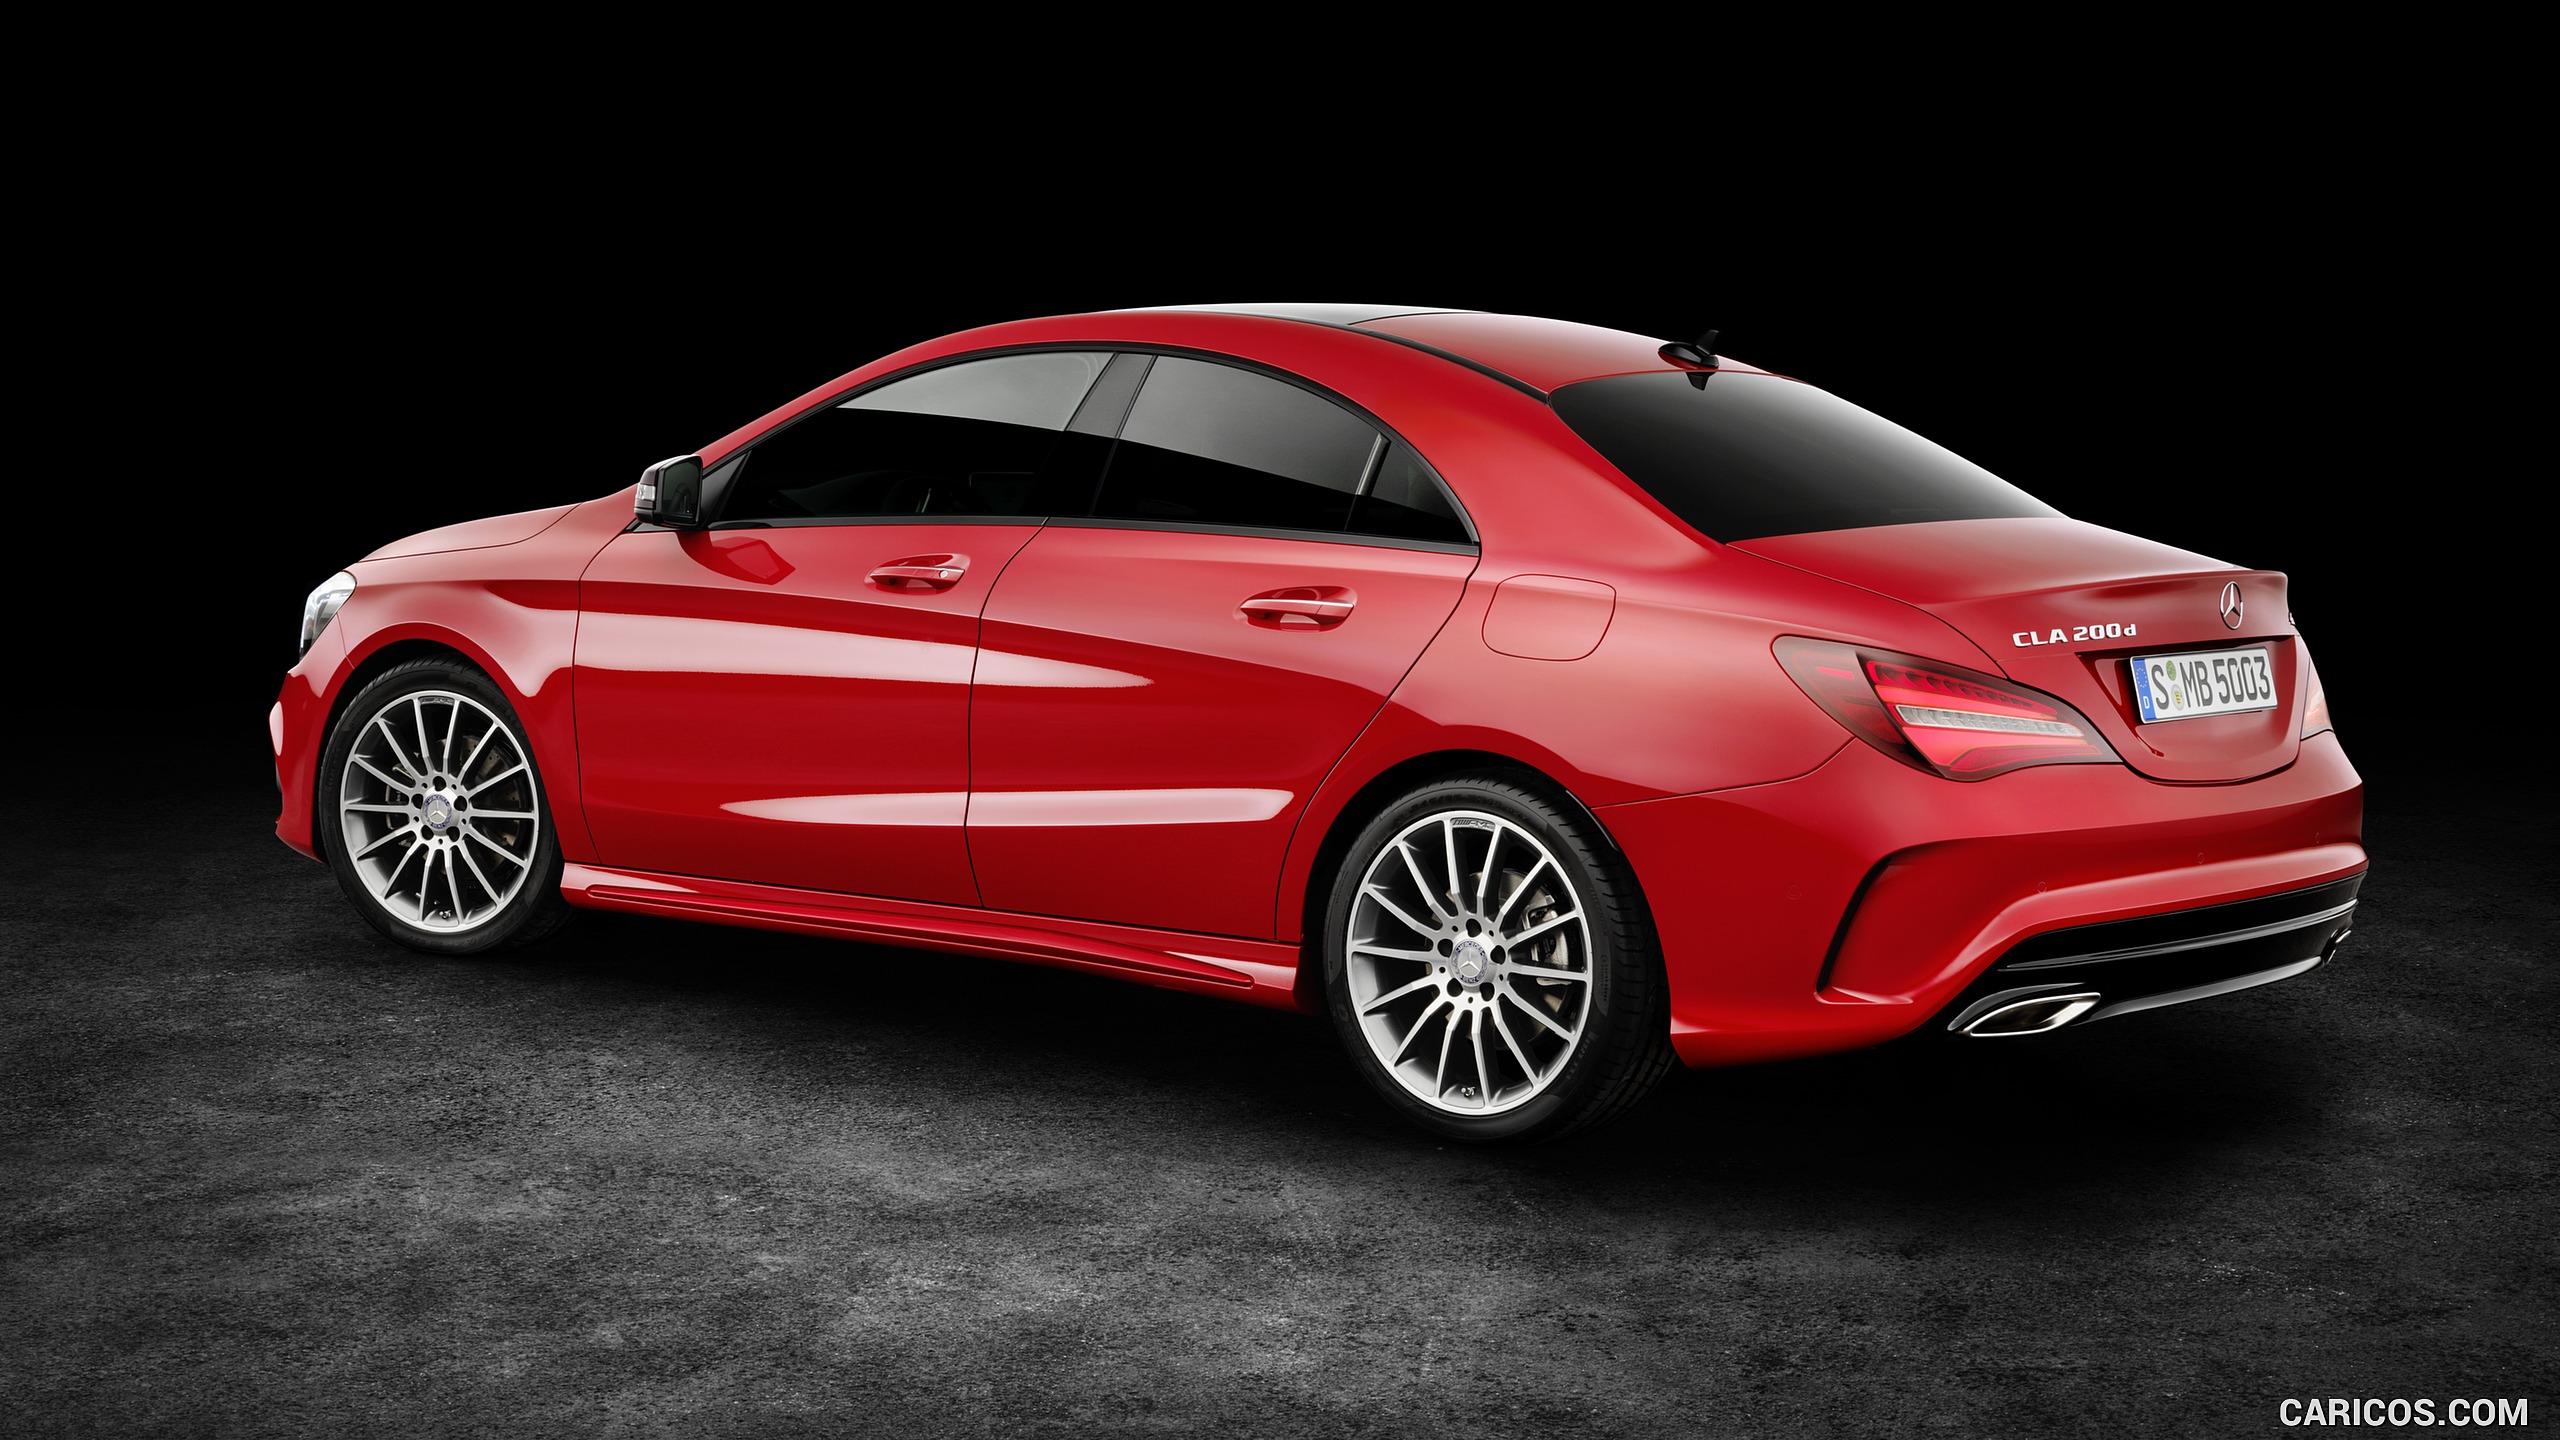 2017 Mercedes-Benz CLA 200 d 4MATIC Coupé (Chassis: C117, Color: Jupiter Red) - Rear, #2 of 7